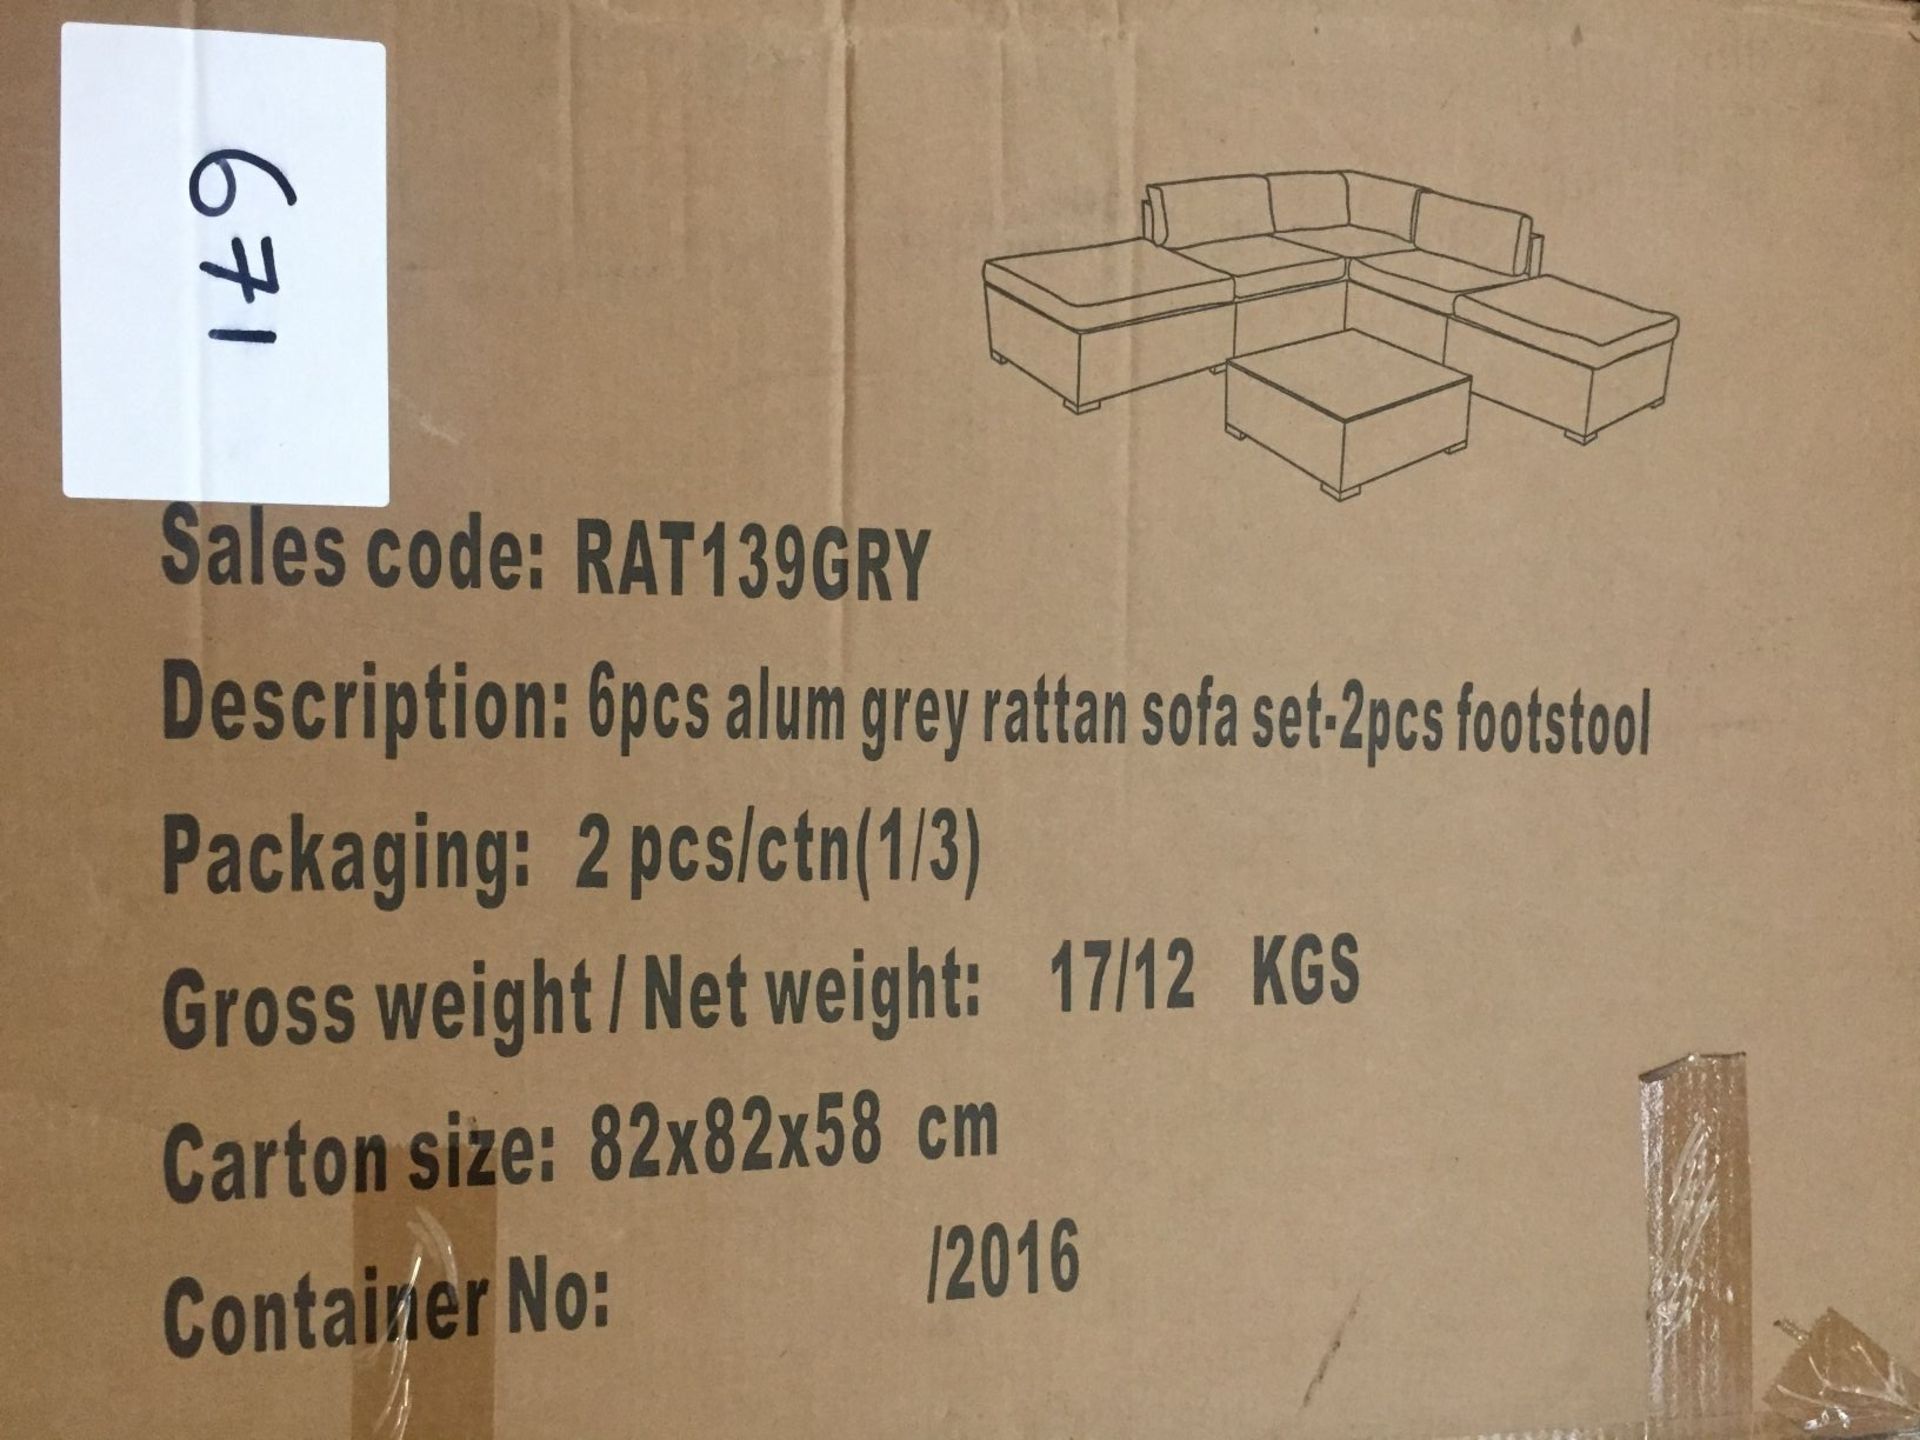 1 LOT TO CONTAIN ALUMINIUM GREY RATTAN SOFA SET (CONTAINS TWO FOOTSTOOLS ) - BOXED